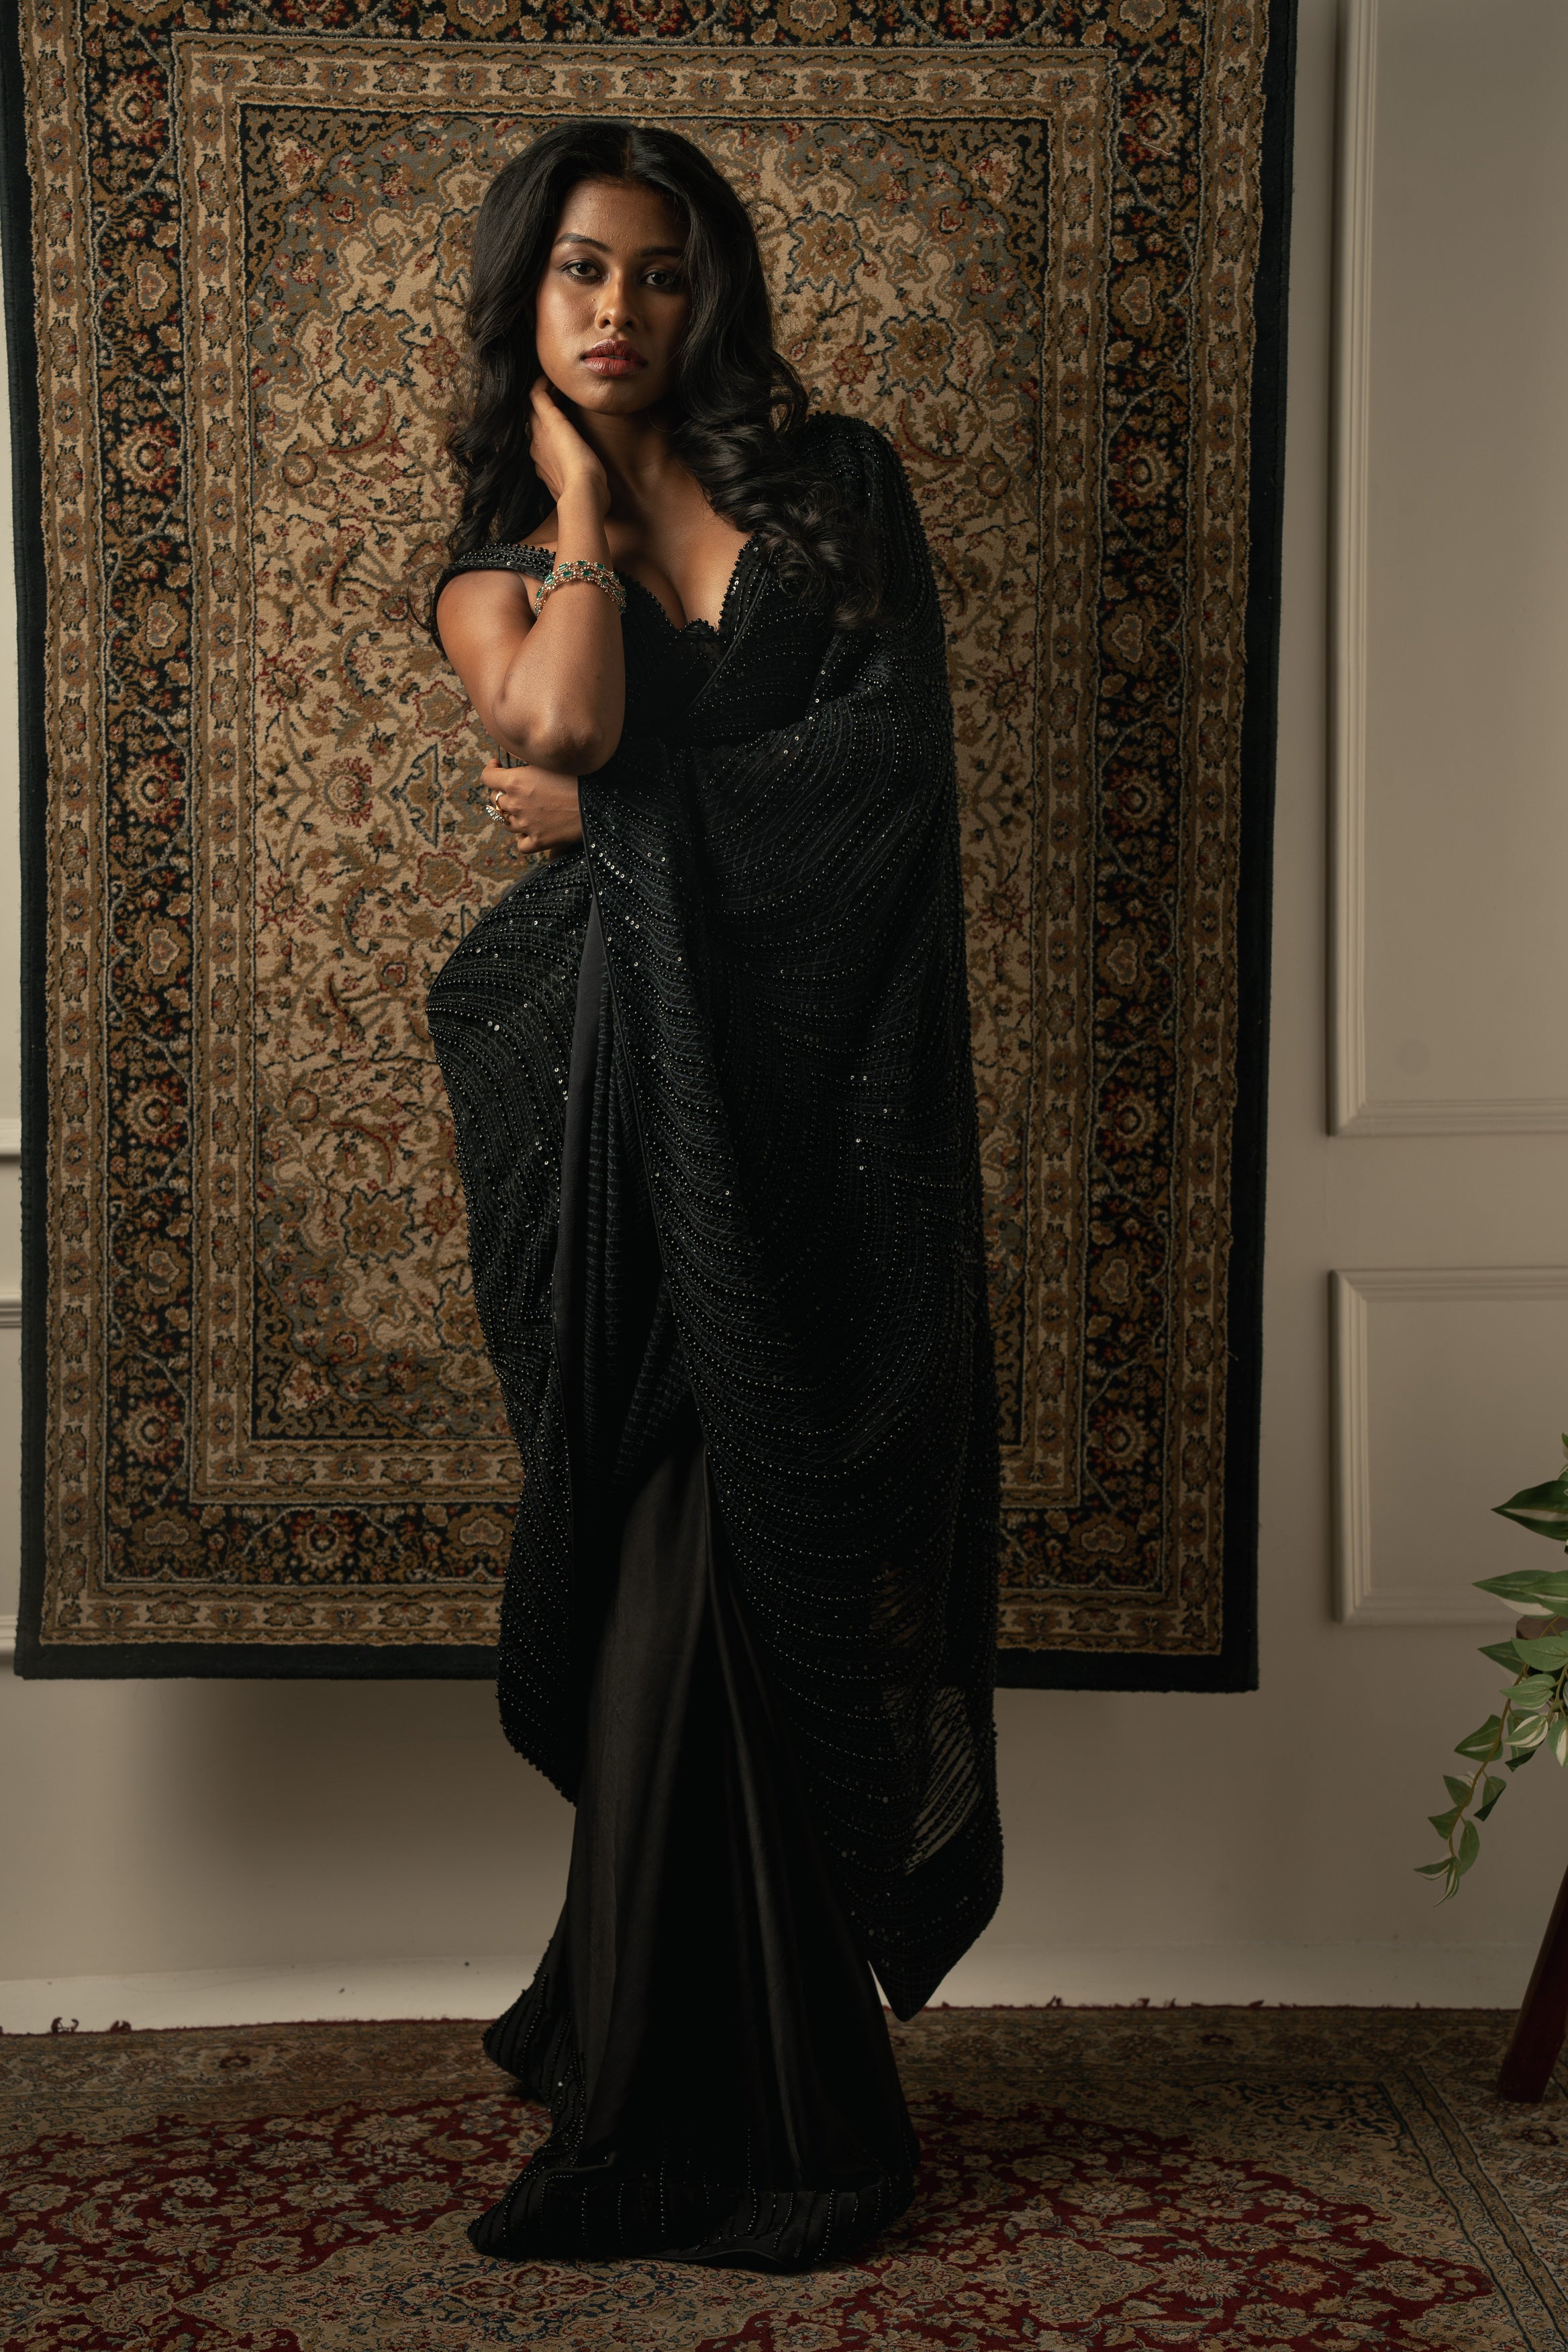 A symphony of textures: Georgette, satin, and shimmer organza come together in this stunning black saree ensemble.